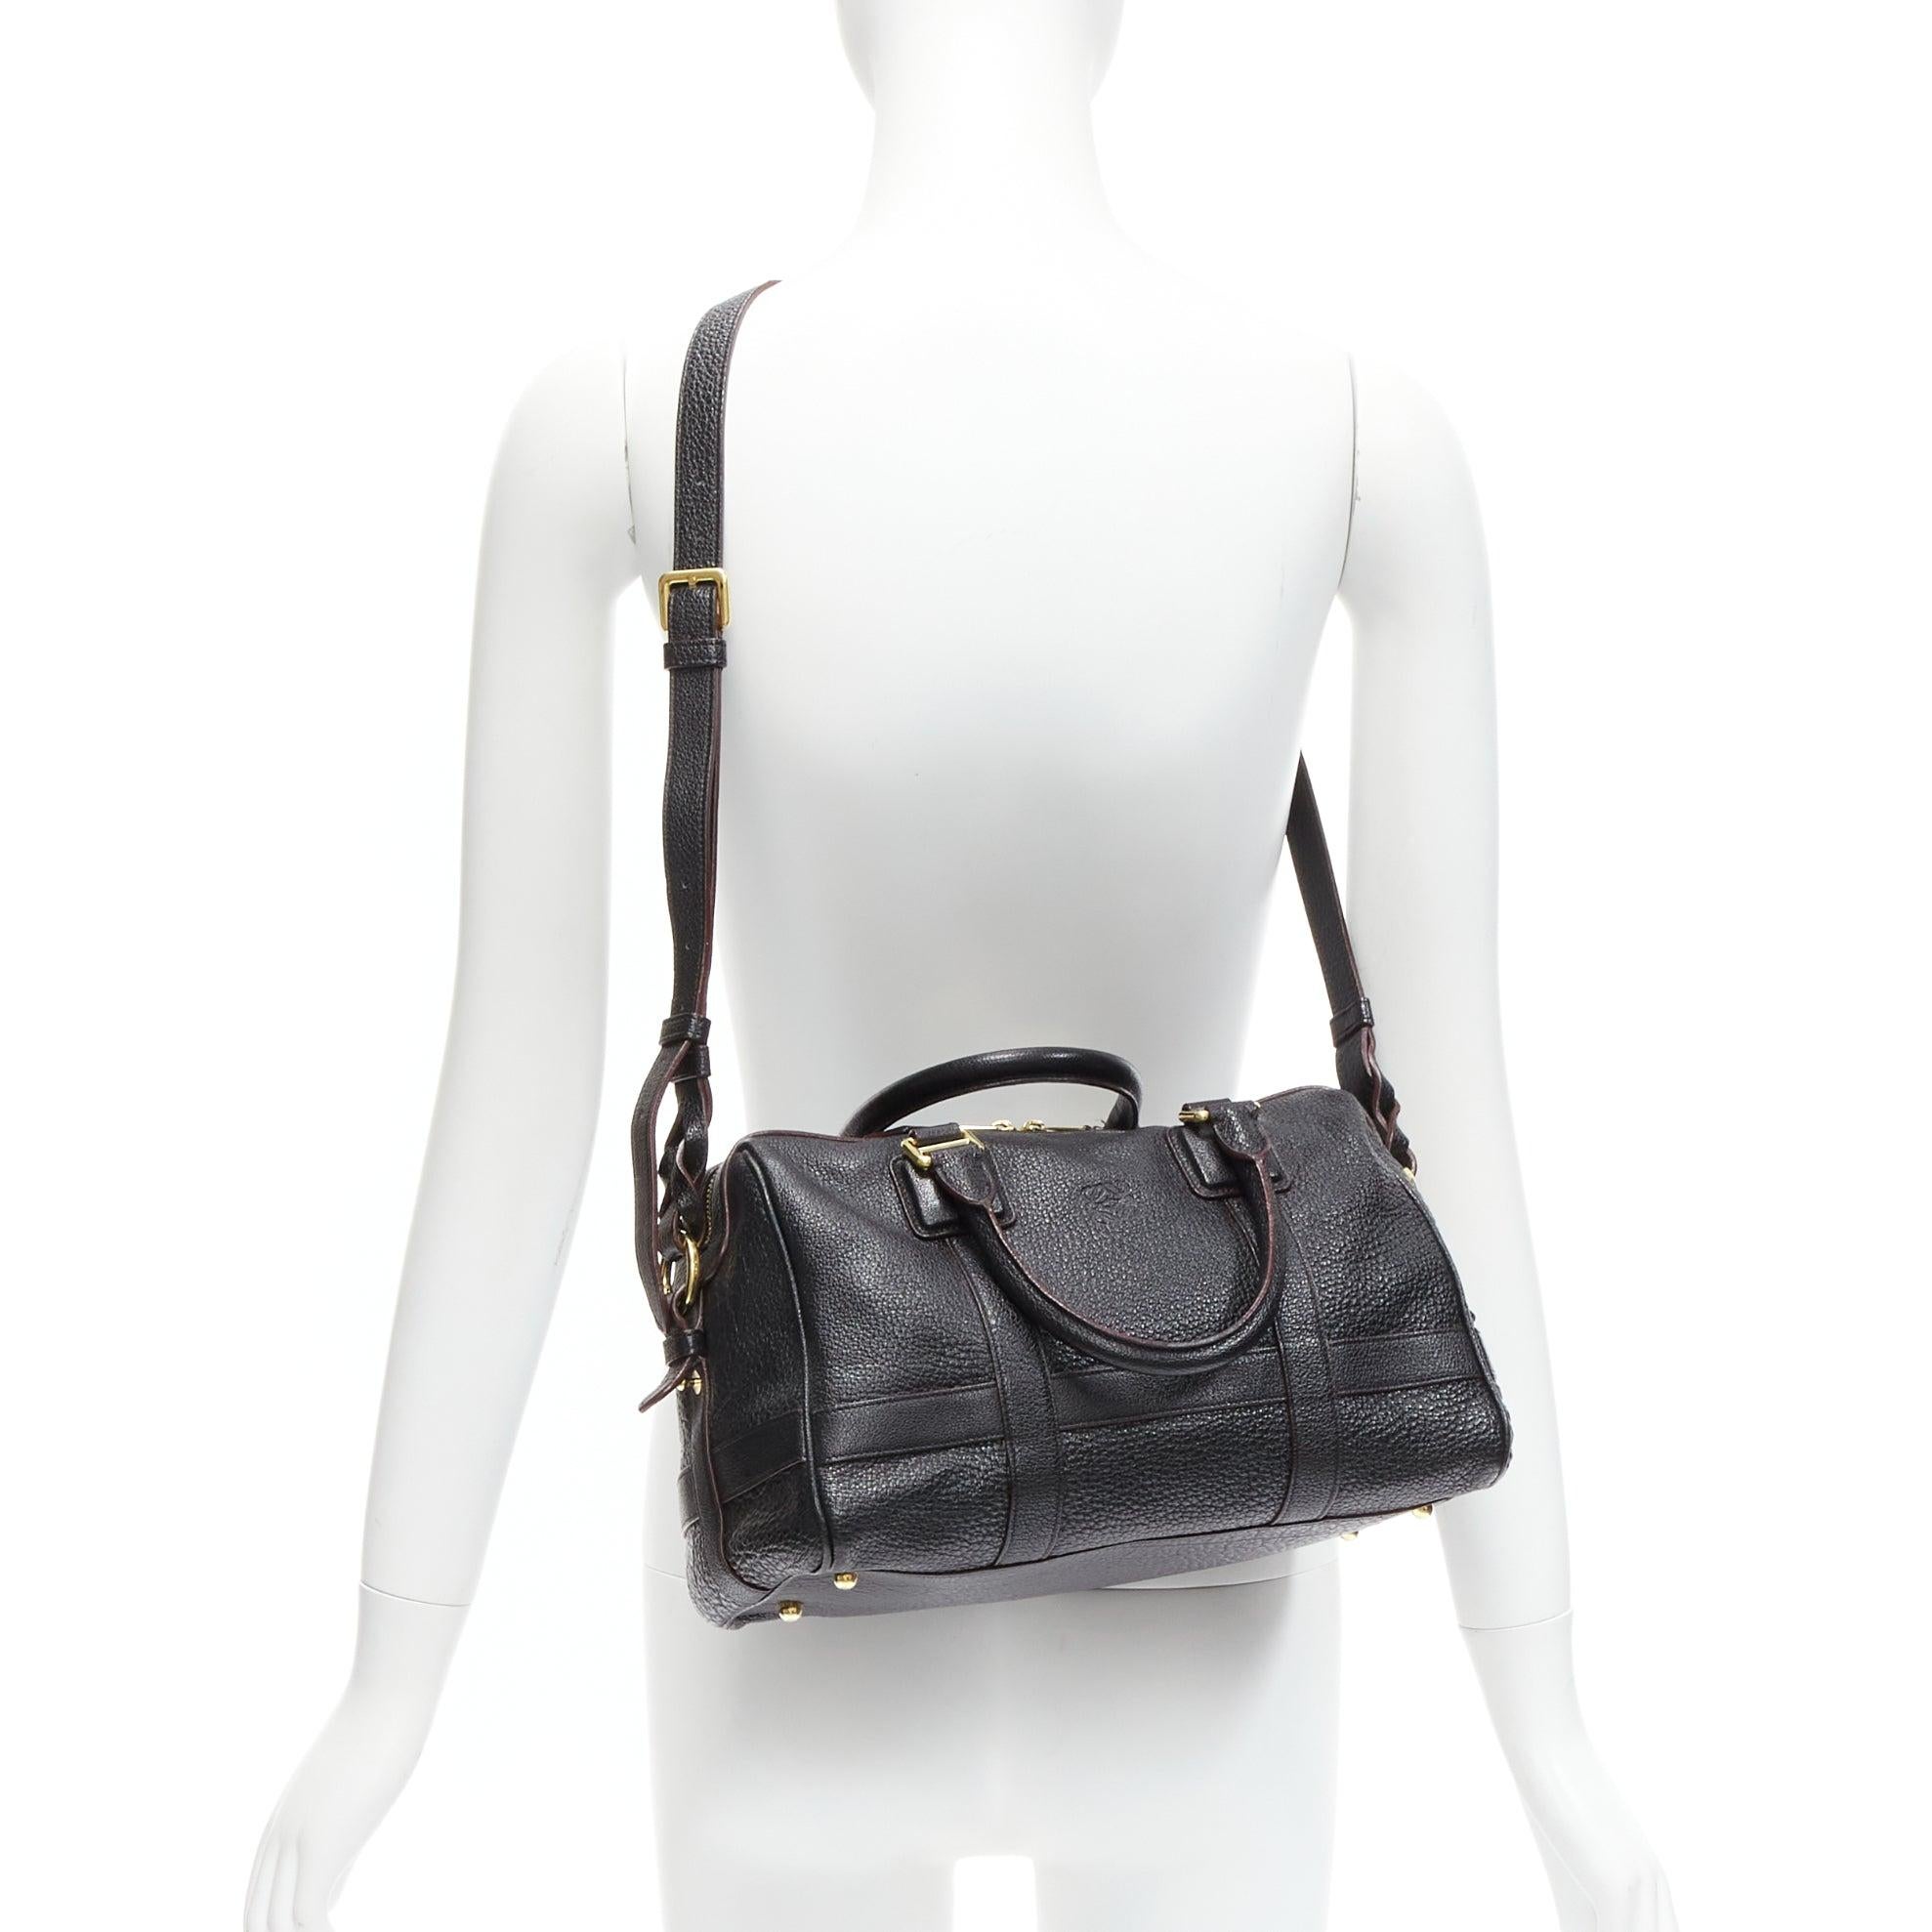 LOEWE Paseo 30 black anagram goatskin crossbody tote bag
Reference: TGAS/D00700
Brand: Loewe
Model: Paseo 30
Material: Leather
Color: Black, Gold
Pattern: Solid
Closure: Zip
Lining: Red Leather
Extra Details: Strap is not detachable. This Paseo